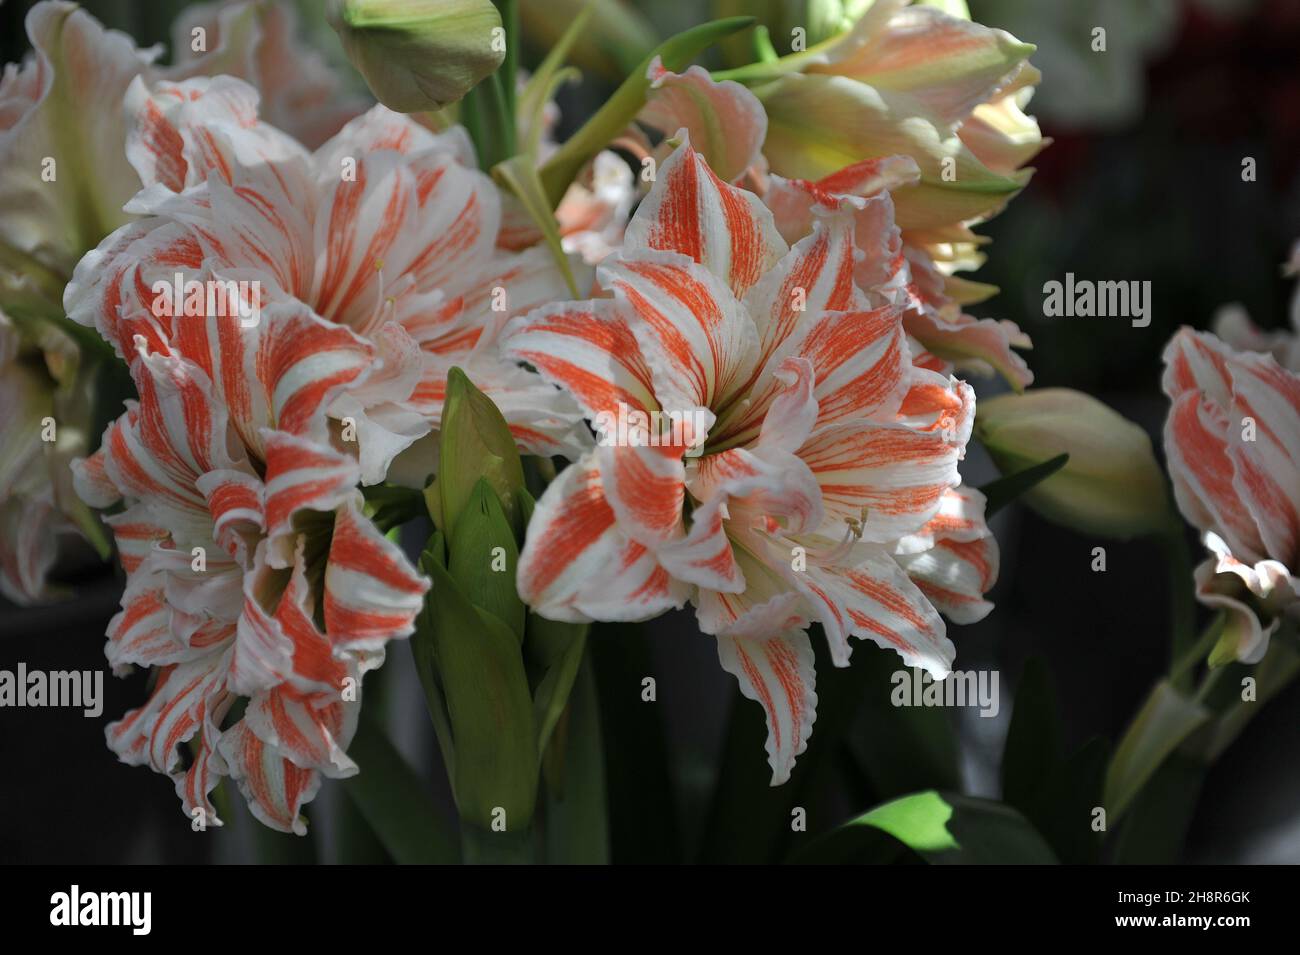 Red and white double-flowered hippeastrum (Amaryllis) Dancing Queen blooms in a garden in April Stock Photo